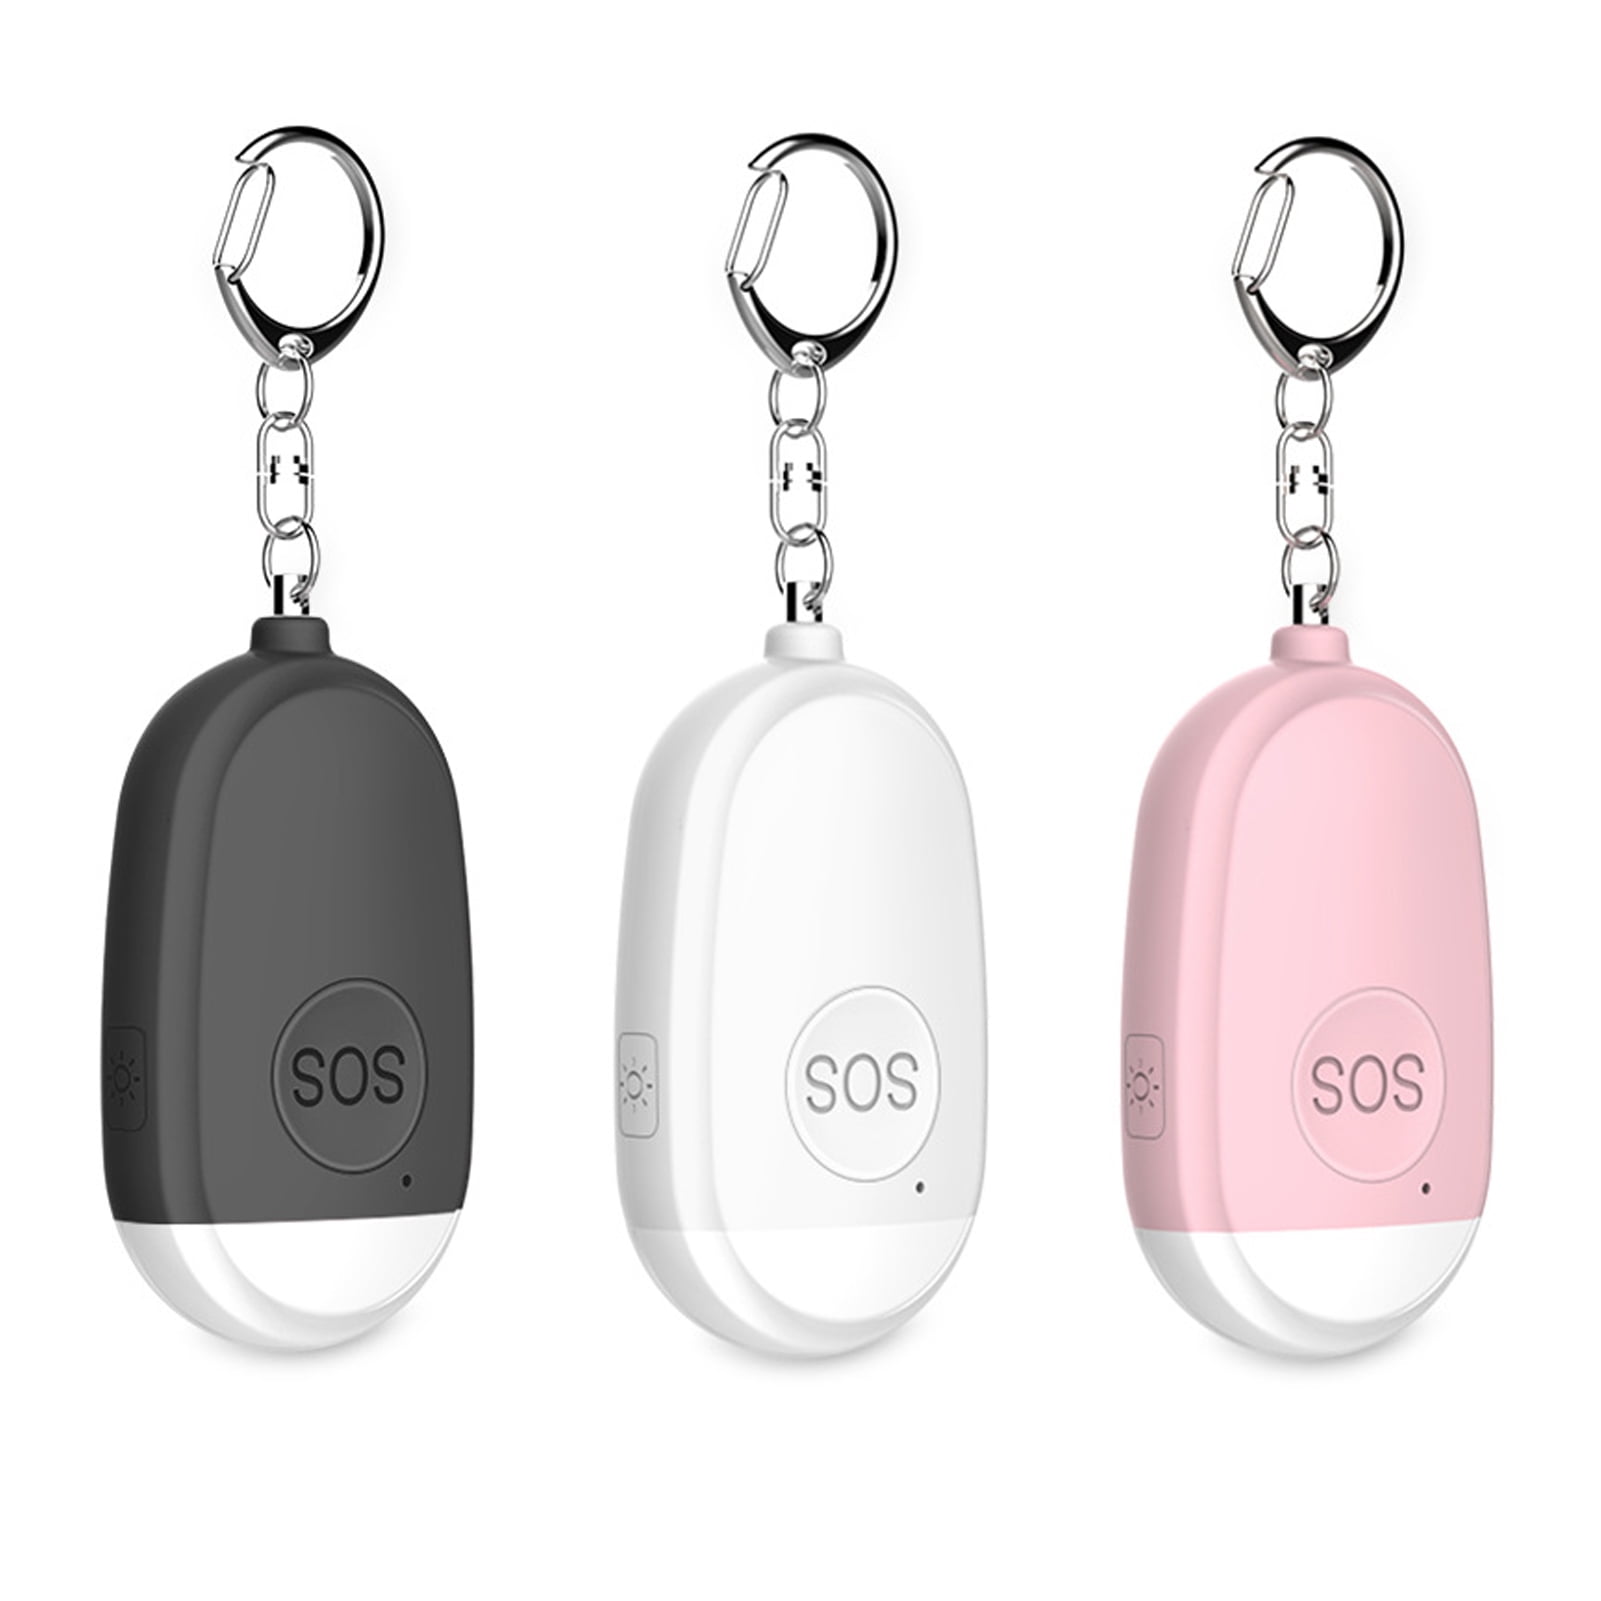 New Personal Alarm Emergency Safety Wing Shape Self Defense Anti-Attack Keychain 